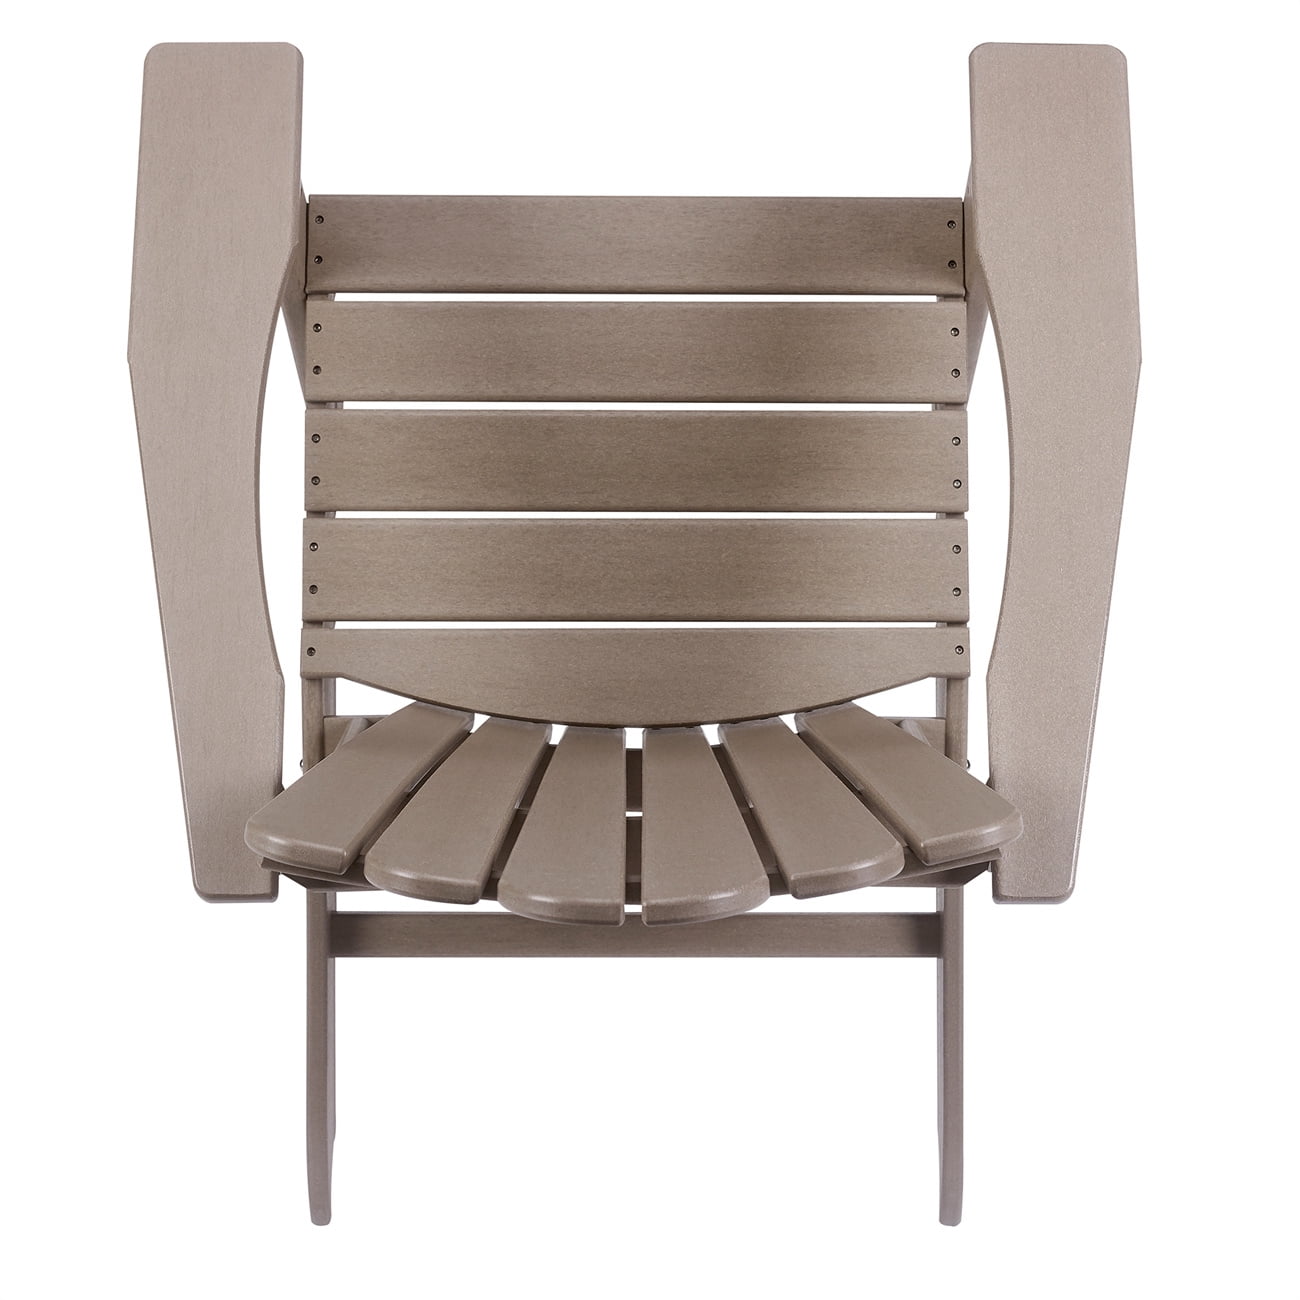 YALEO Outdoor Adirondack Chair All-Weather Rocking Chair for Fire Pit & Garden Brown Fade-Resistant Lounge Chair 